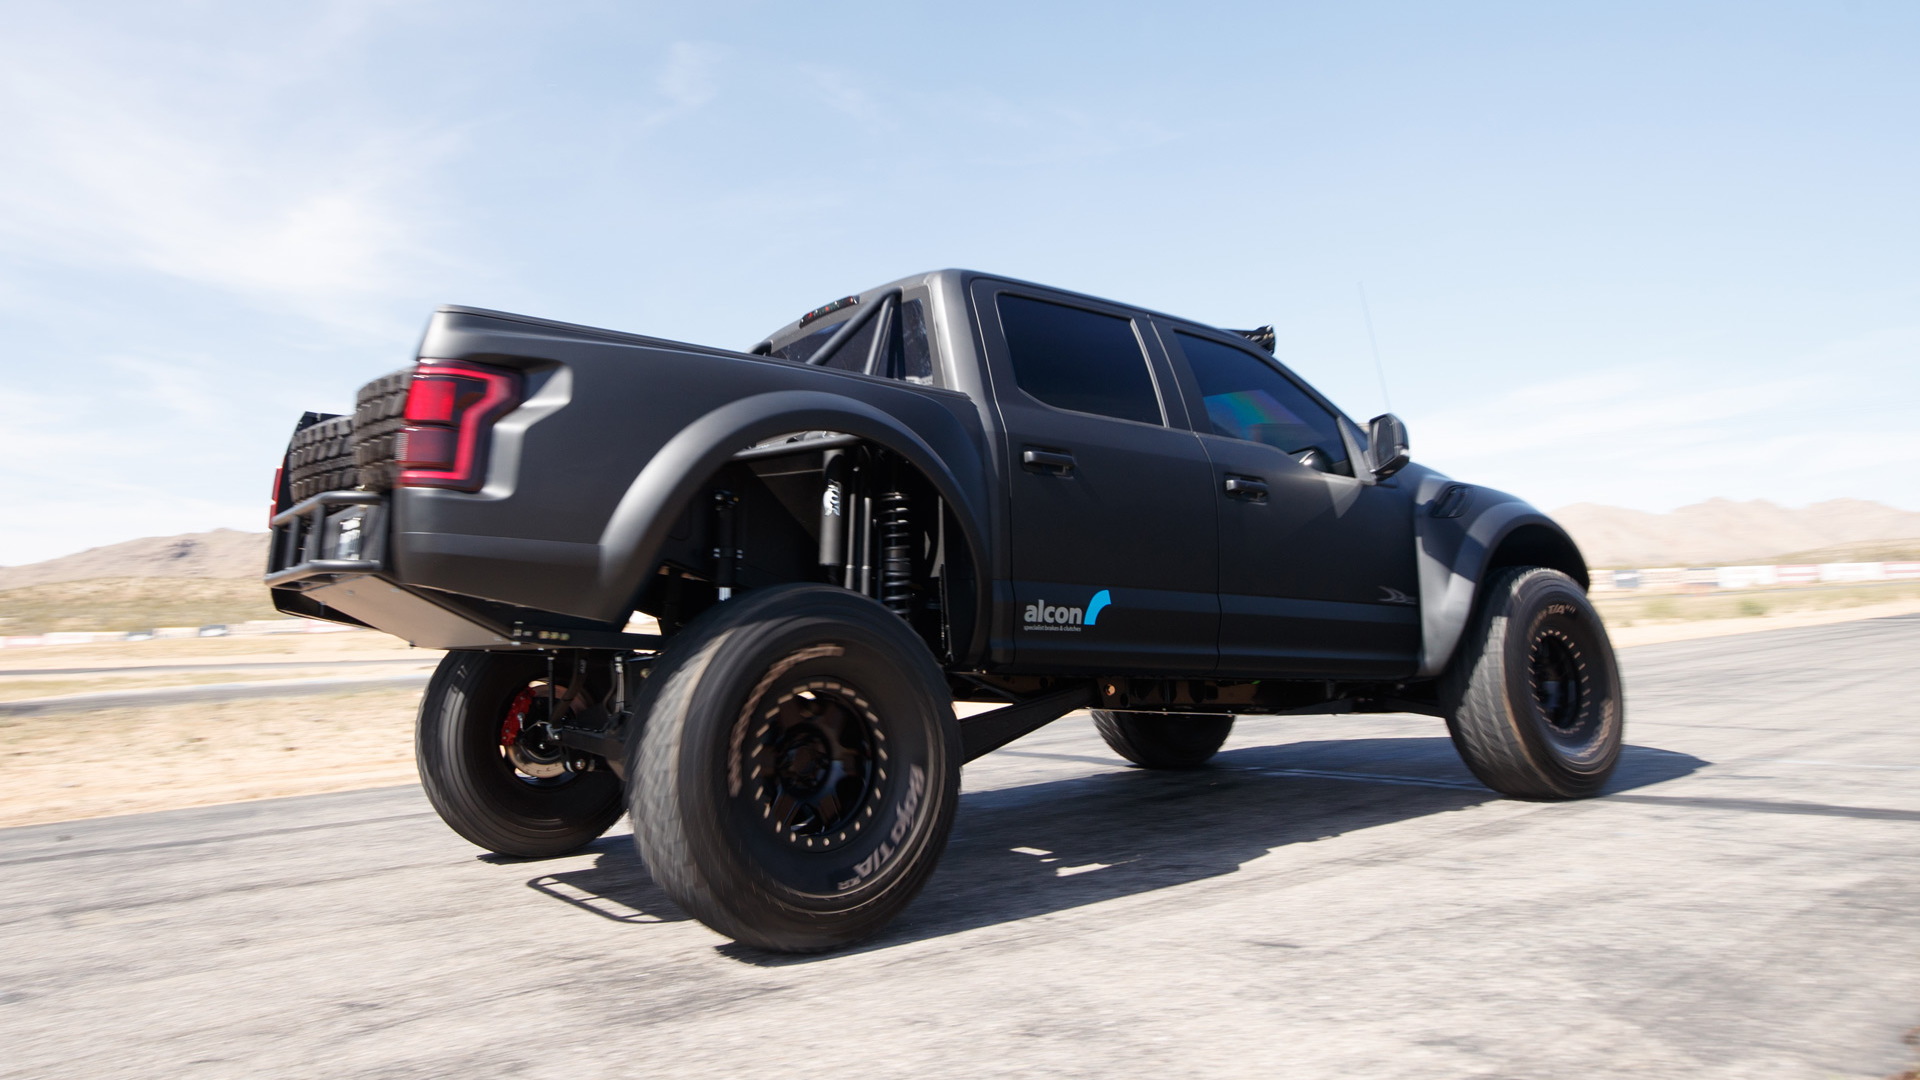 2017 Ford F-150 Raptor equipped with Alcon brake upgrade